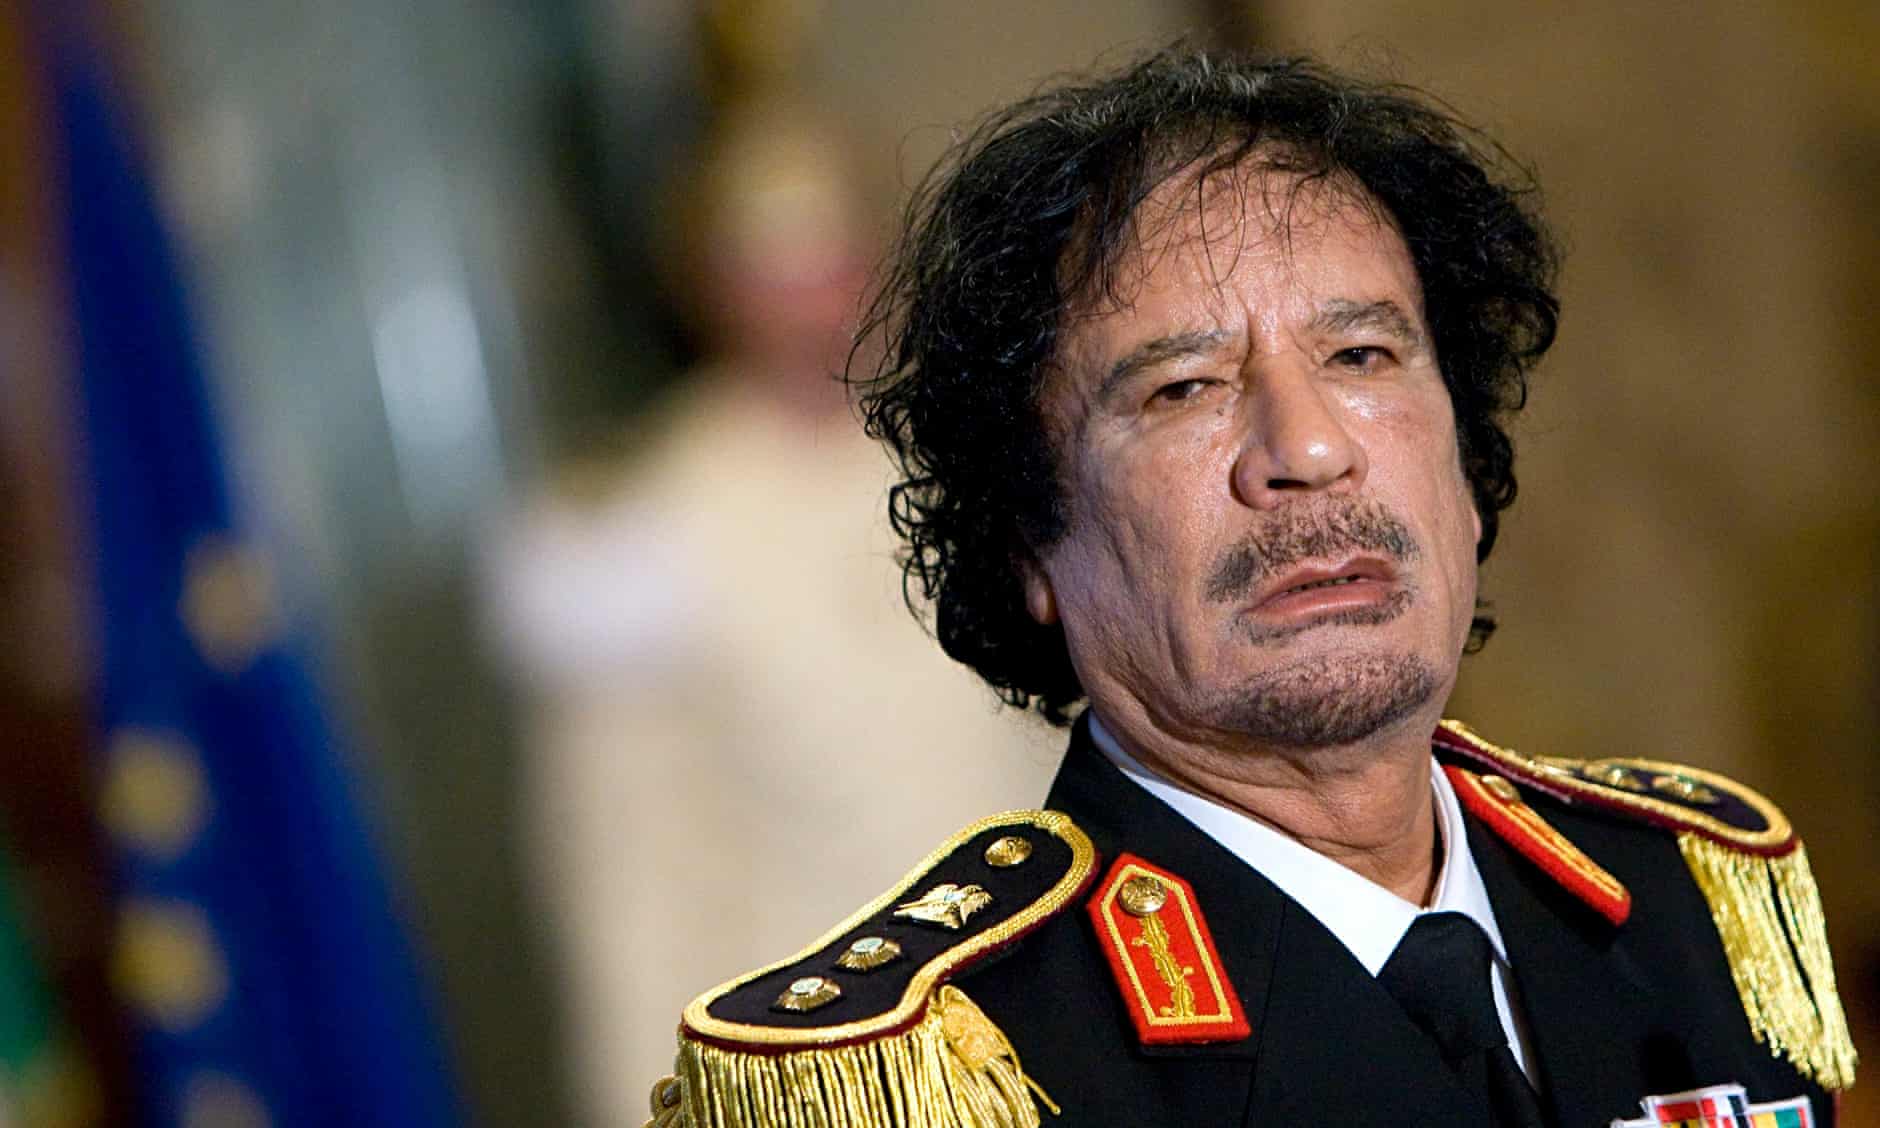 The famously erratic Libyan leader Muammar Gaddafi was refusing to leave the country, with negotiations around whether he could remain in the country but leave politics